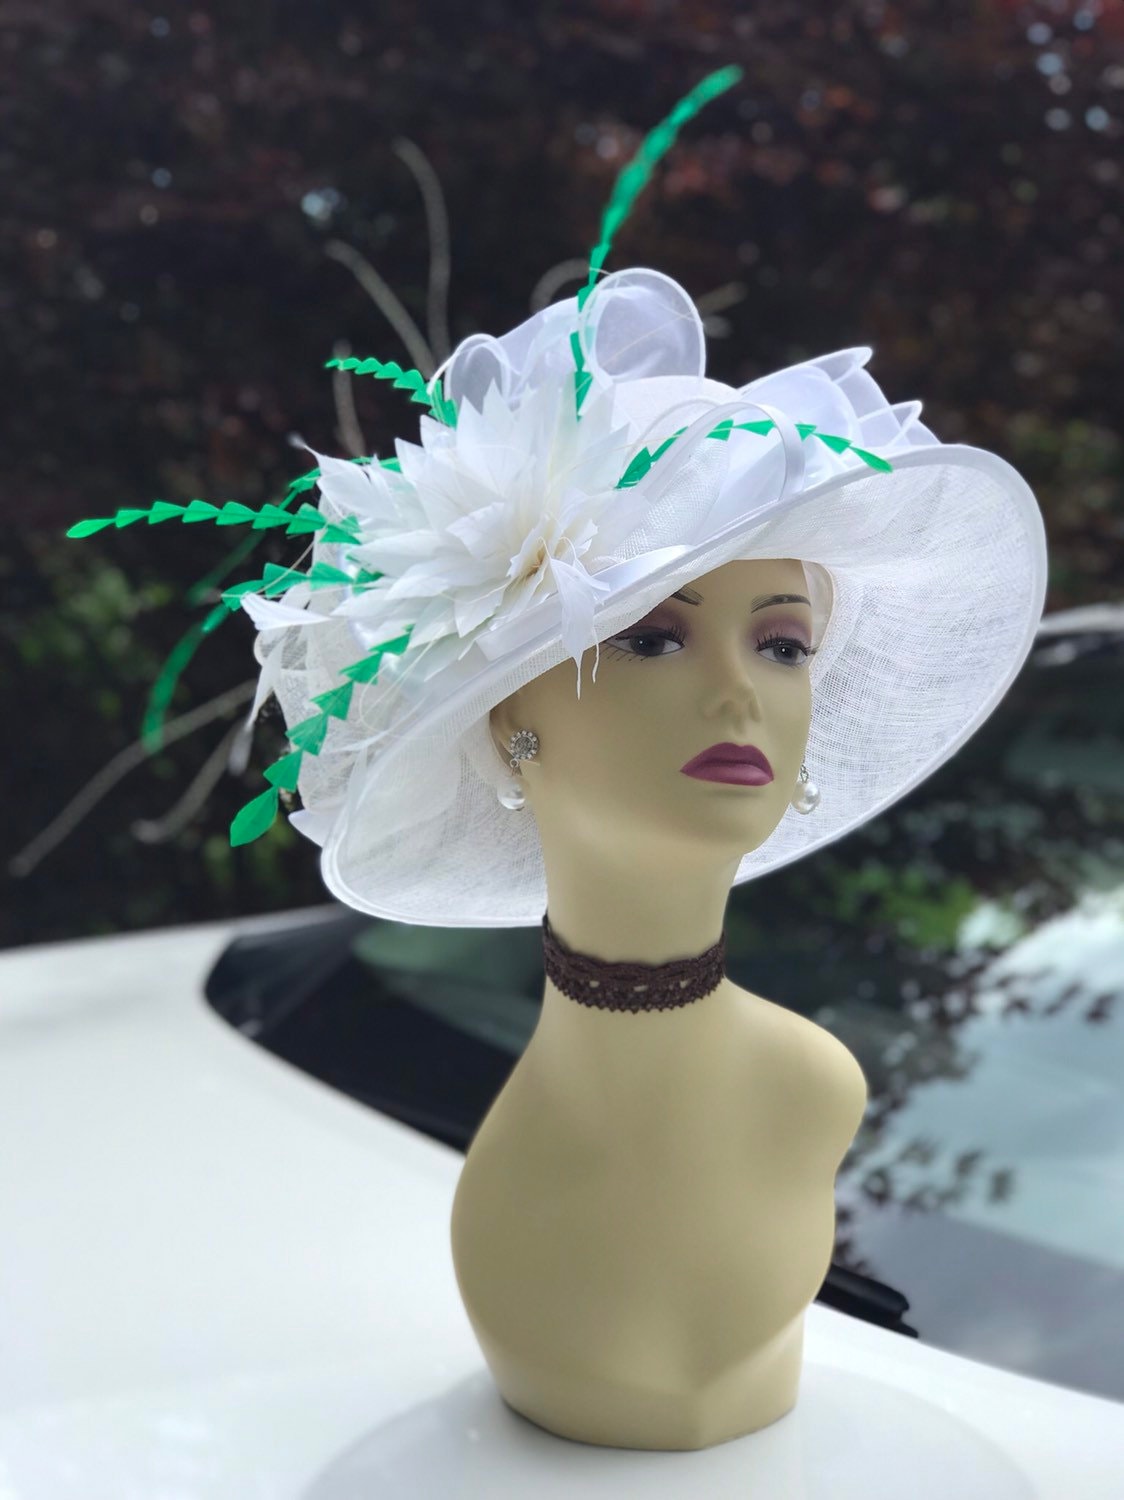 Church Easter Formal Hat Feather Satin Medium Woman's Sinamay Hat Wedding SF044 WhiteWhite, Royal Blue, Pink Tea Party Kentucky Derby